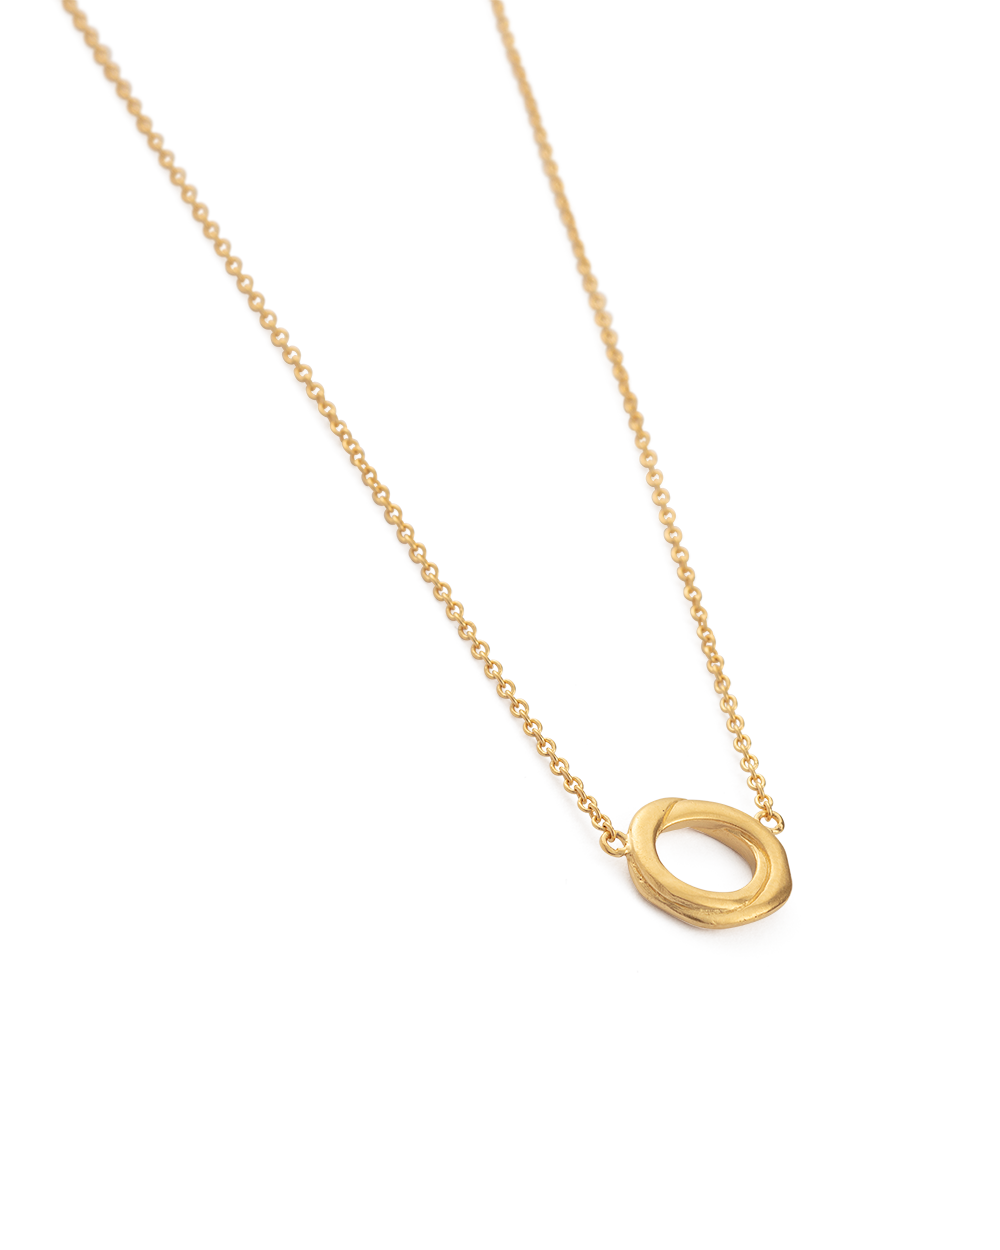 INFINITE NECKLACE (18K GOLD PLATED) - IMAGE 2